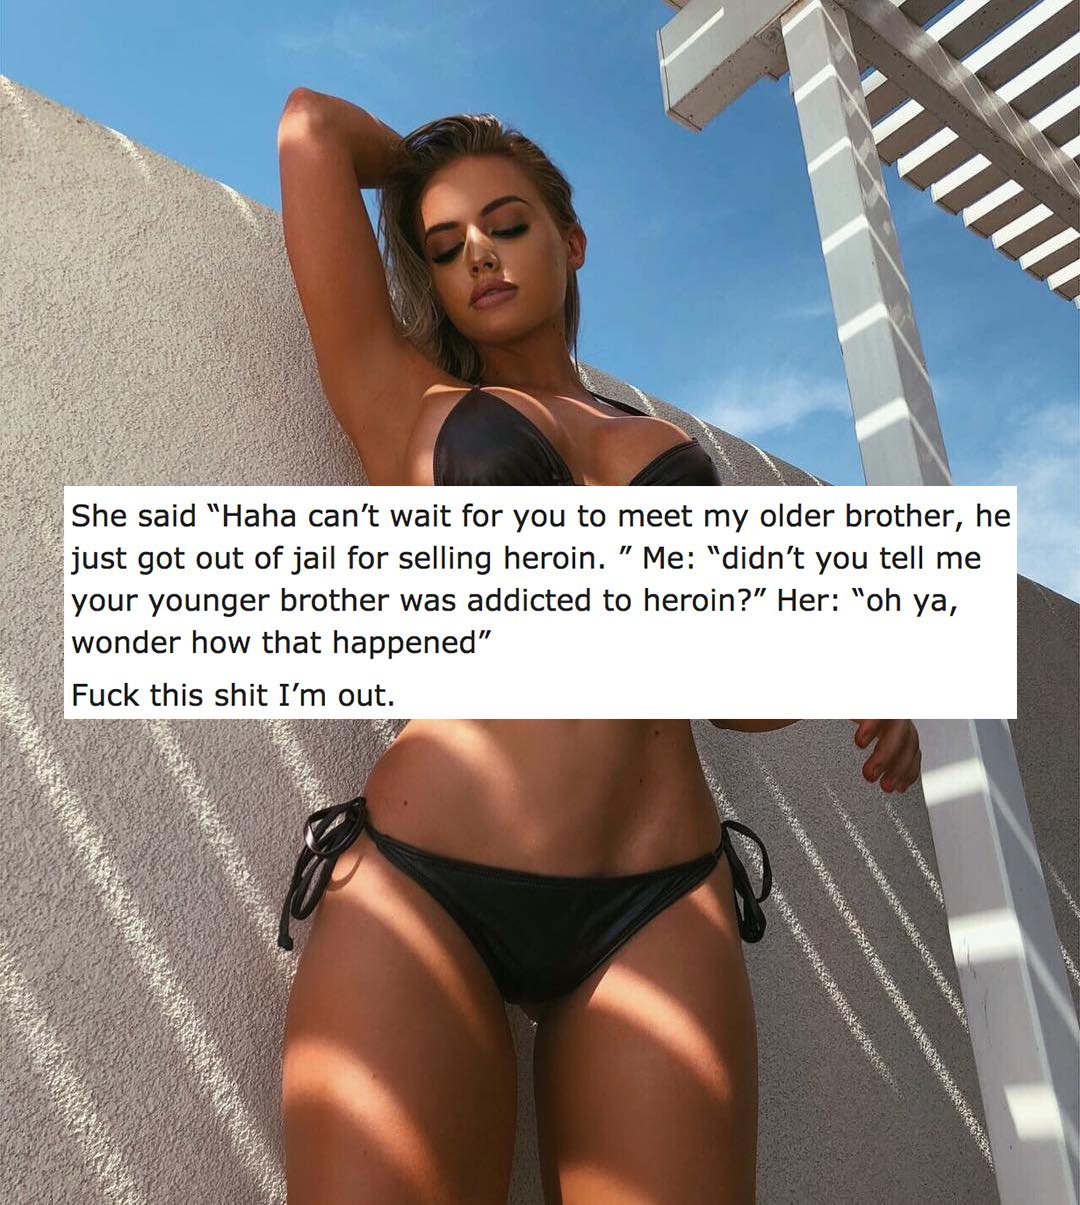 bikini - She said "Haha can't wait for you to meet my older brother, he just got out of jail for selling heroin." Me "didn't you tell me your younger brother was addicted to heroin?" Her "oh ya, wonder how that happened" Fuck this shit I'm out.